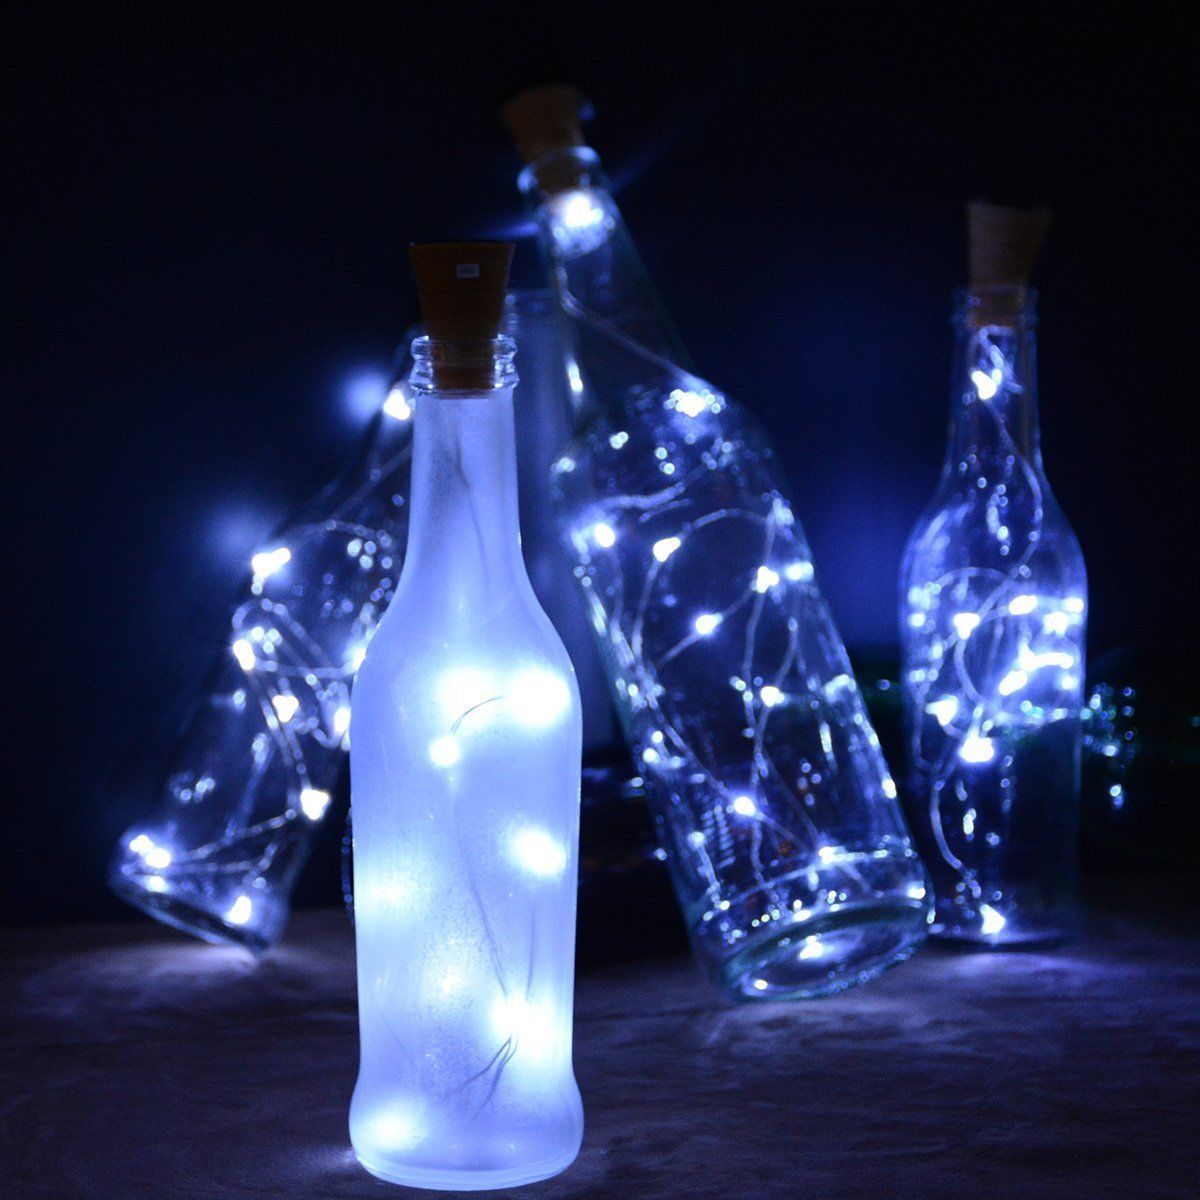 3 Pack | 3 Ft 10 Super Bright Cool White LED Solar Operated Wine Bottle lights With Cork DIY Fairy String Light For Home Wedding Party Decoration - PaperLanternStore.com - Paper Lanterns, Decor, Party Lights &amp; More